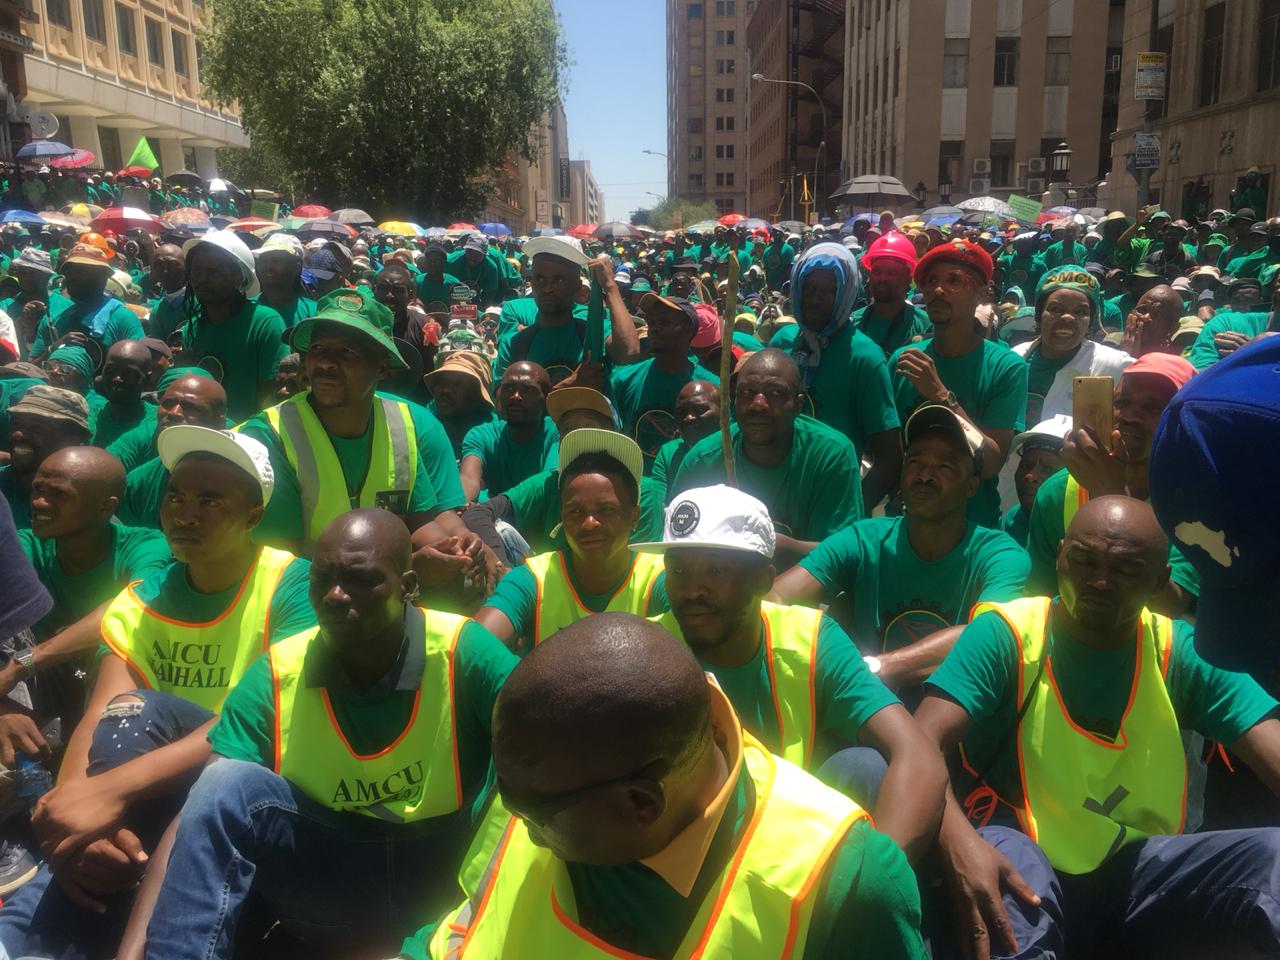 [IN PICTURES] Amcu marches to Sibanye-Stillwater